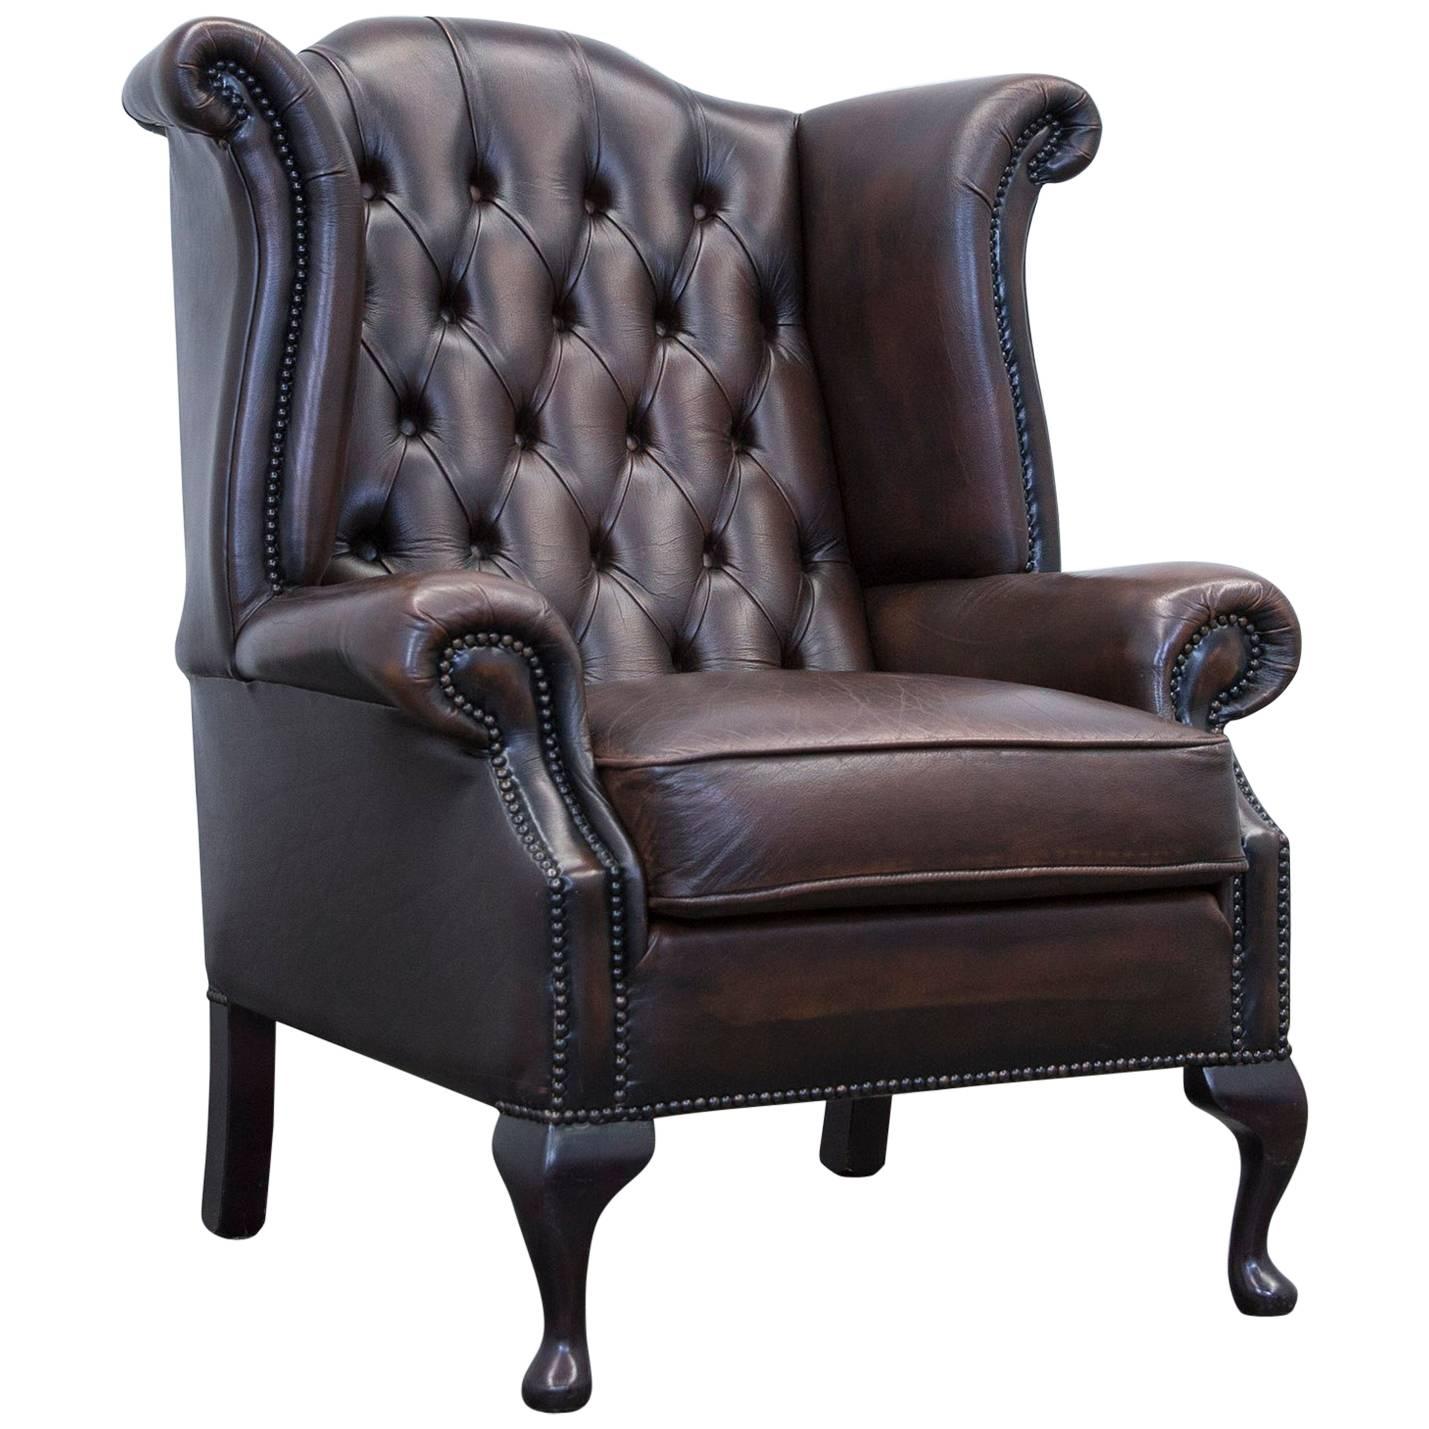 Chesterfield Leather Wingback Chair Brown One Seat Couch Retro Vintage For Sale